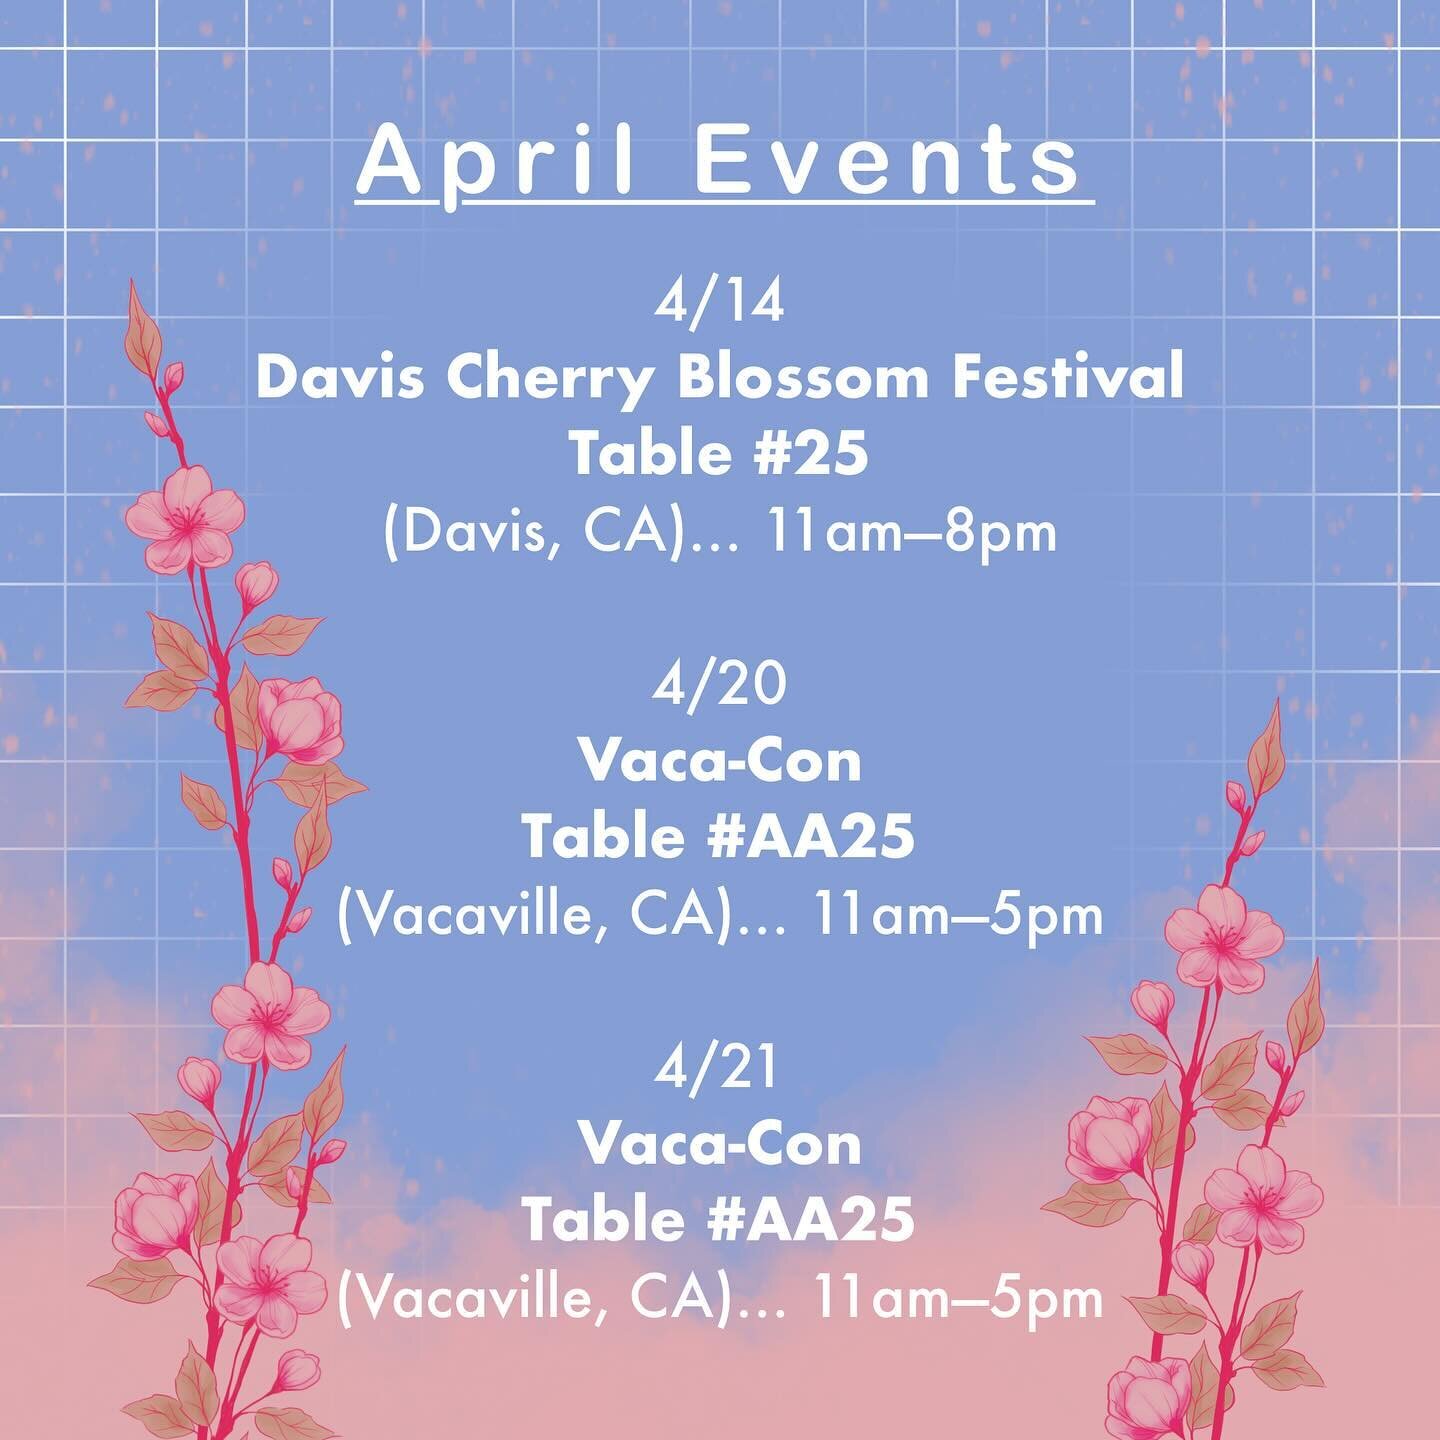 Upcoming Spring Events! Been busy working on some new things 🌸✨

Davis Cherry Blossom Festival
Sunday Only 4/14 11am&ndash;8pm
Table 25
@davischerryblossom 

Vaca-Con
4/20&ndash;4/21 11am&ndash;5pm
Table AA25
@vacacon 

─────&bull;~❉᯽❉~&bull;─────
#